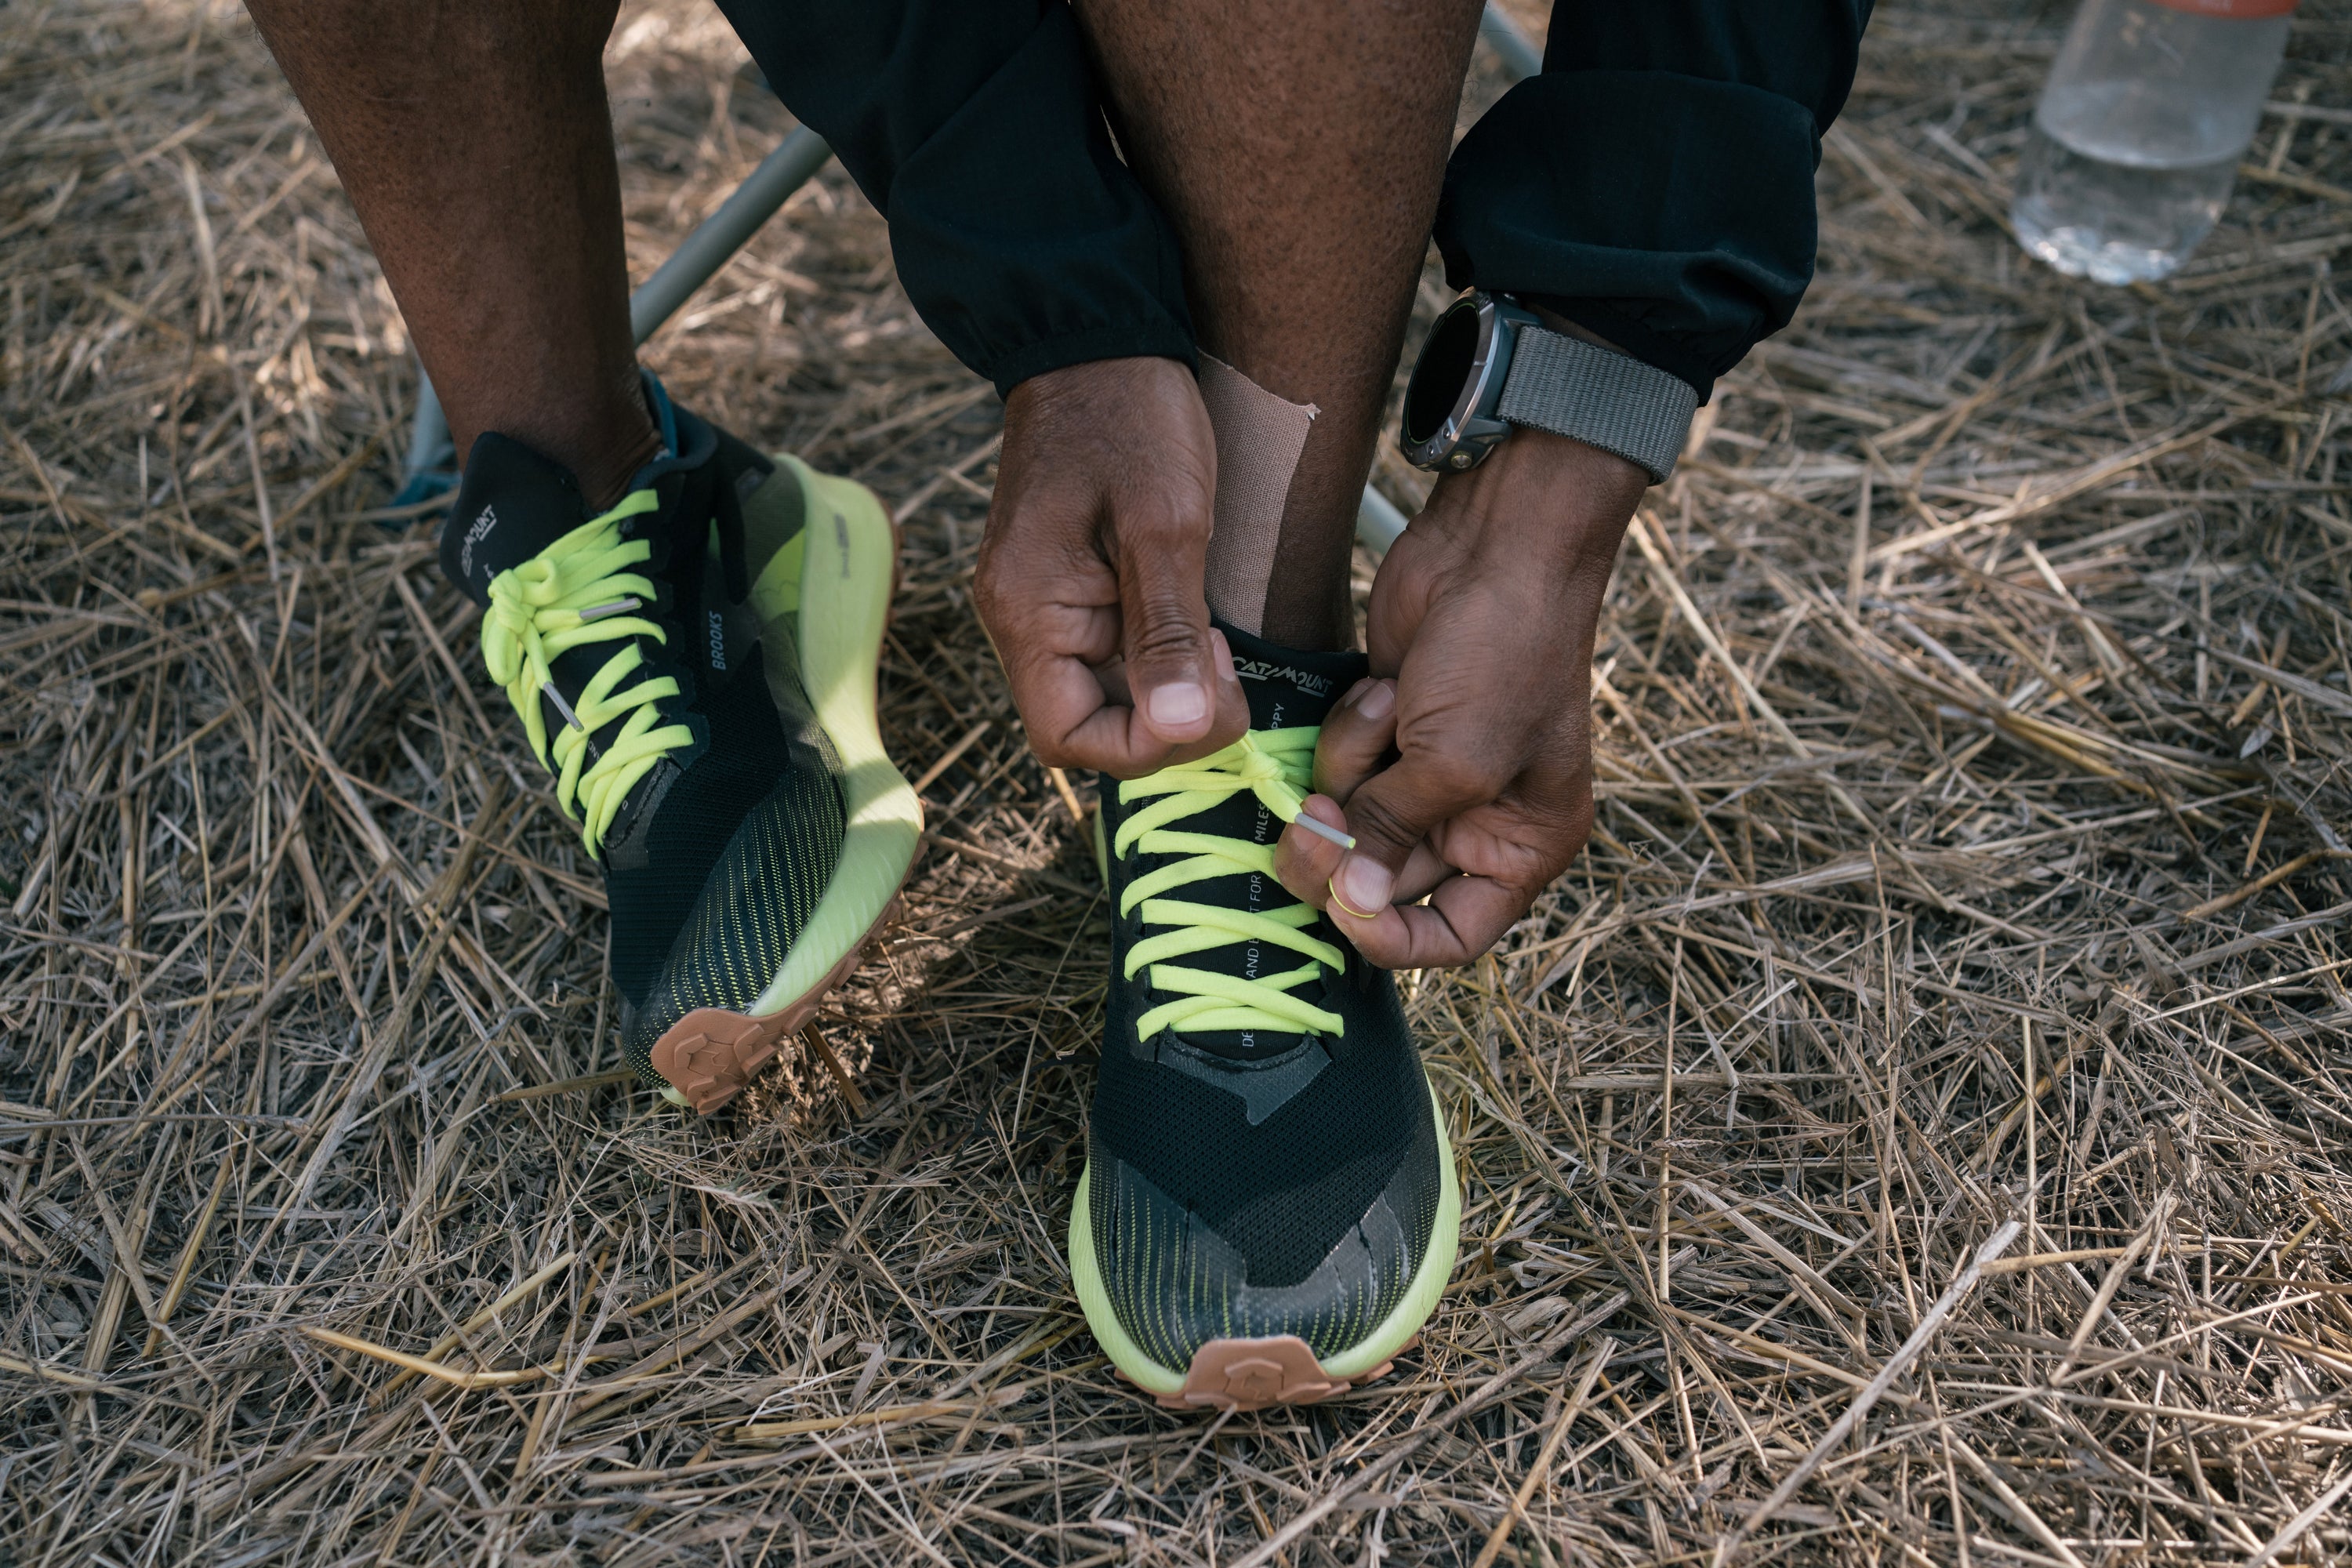 The retired long distance runner ties his shoe laces during a meal break